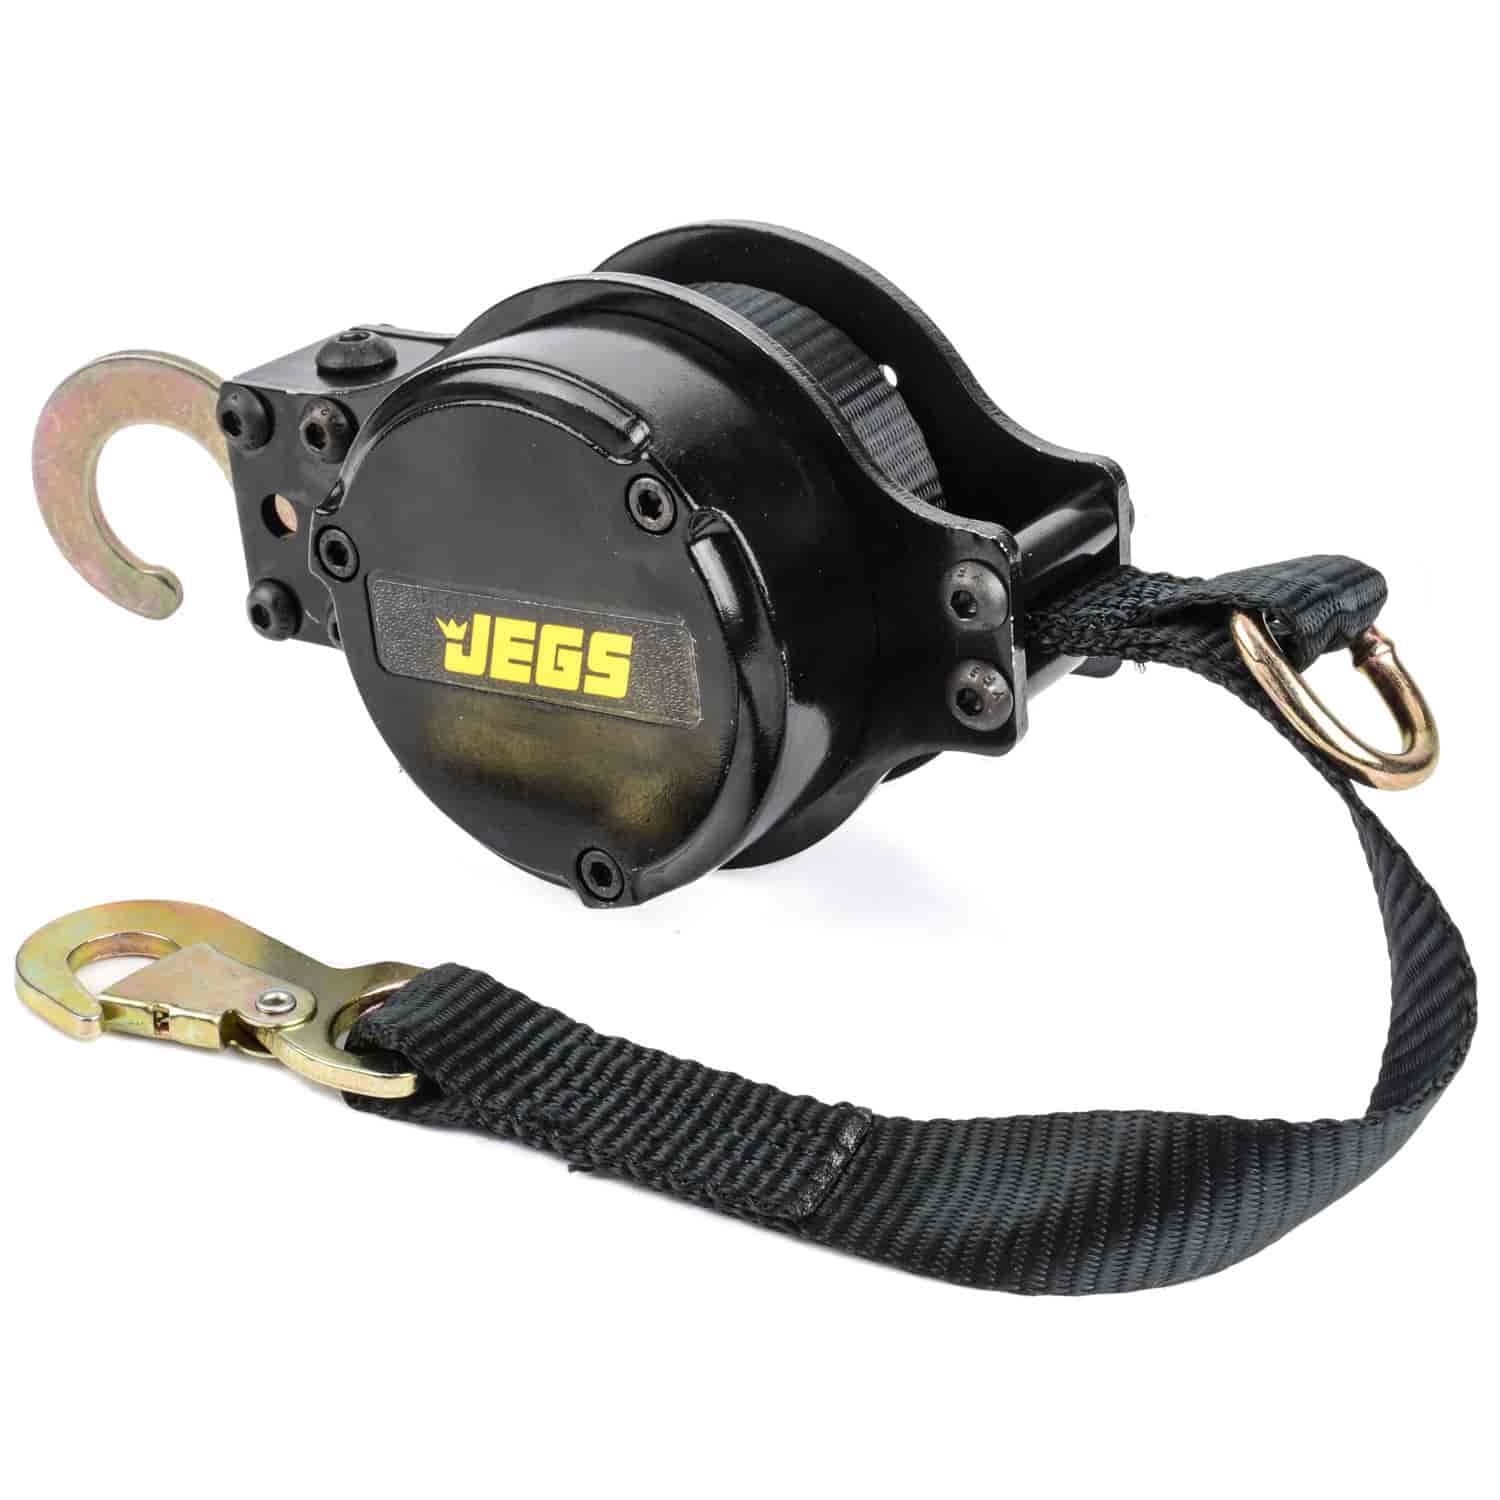 JEGS Retractable Tow Strap [Capacity: 4000 lbs.]